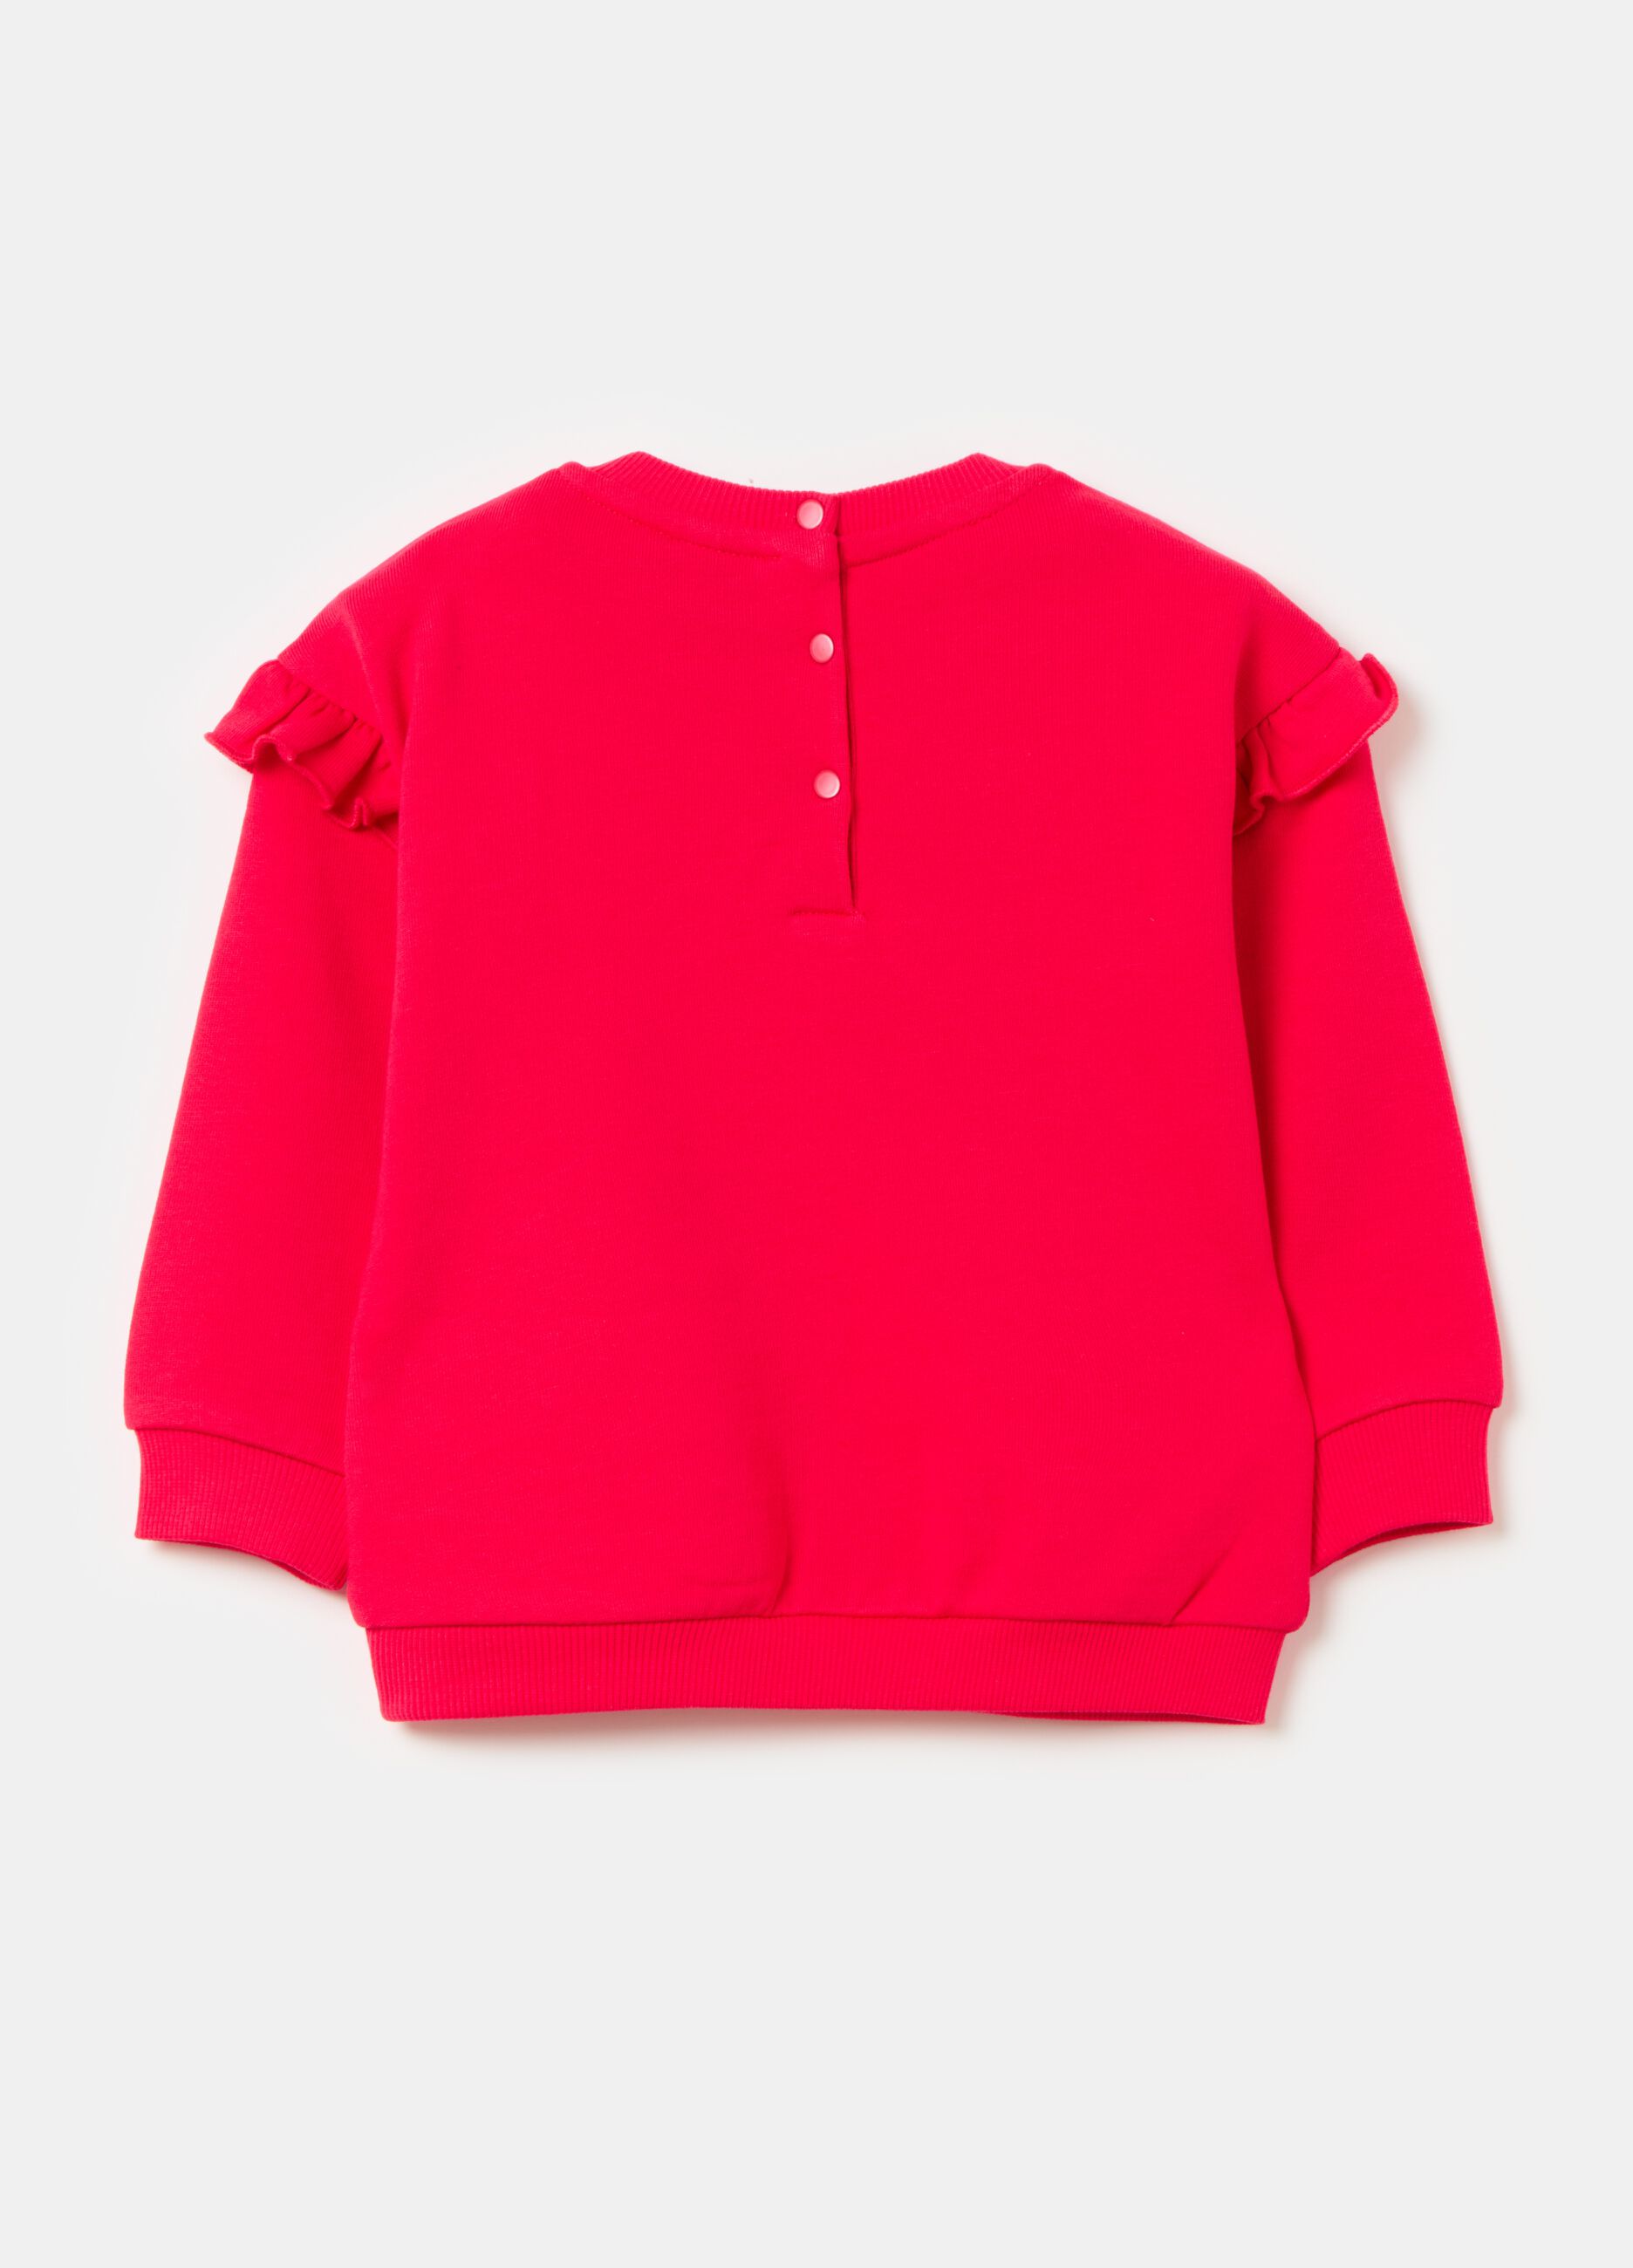 Sweatshirt in French terry with frills